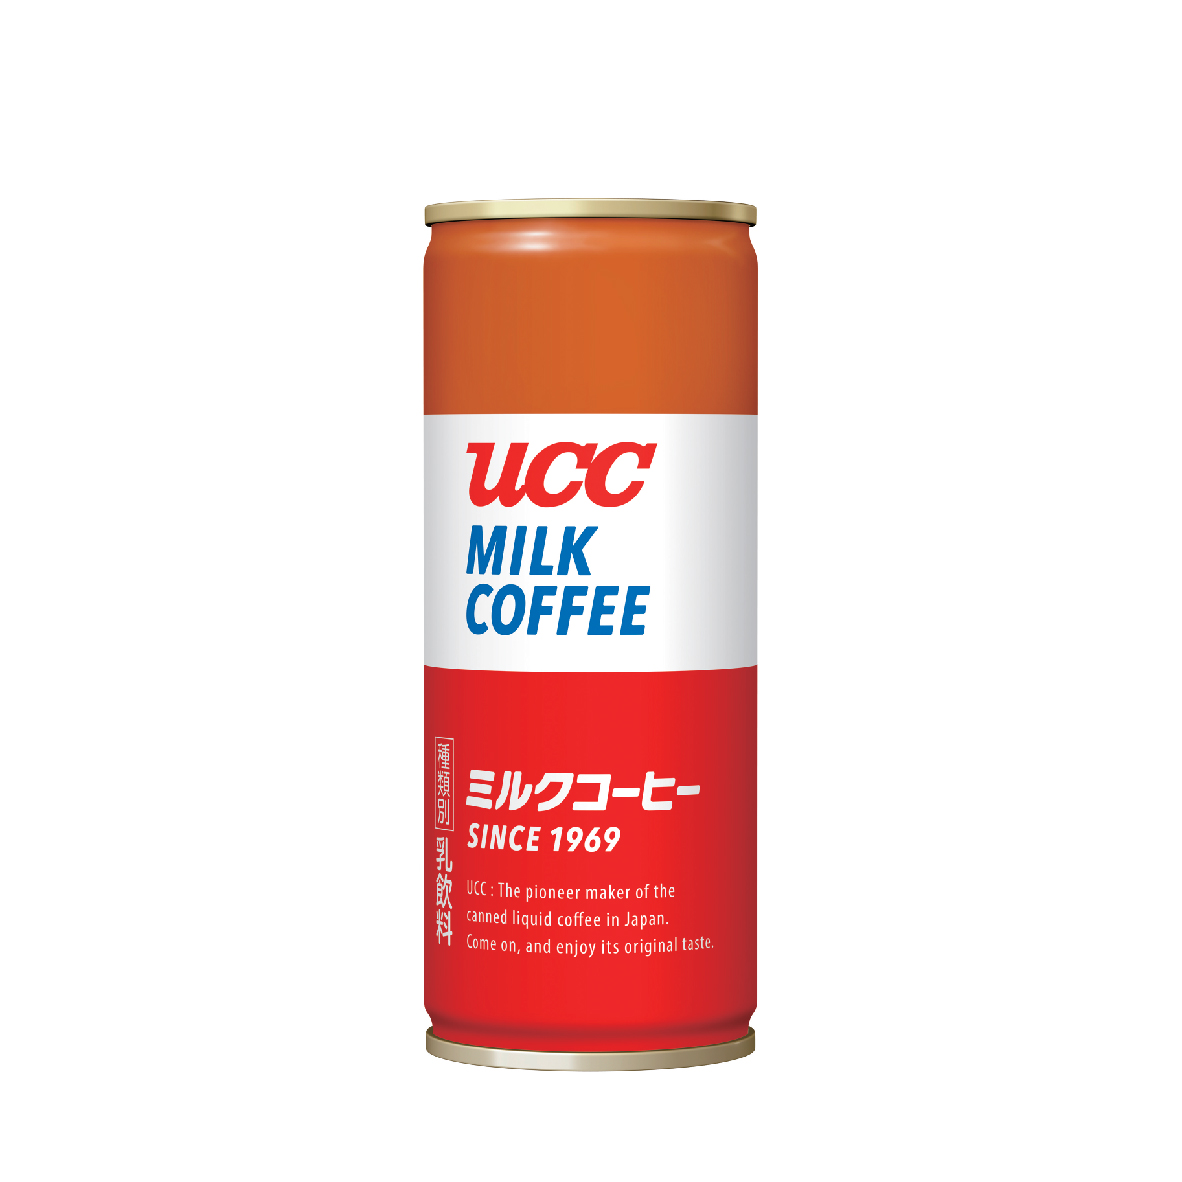 UCC Milk Canned Coffee